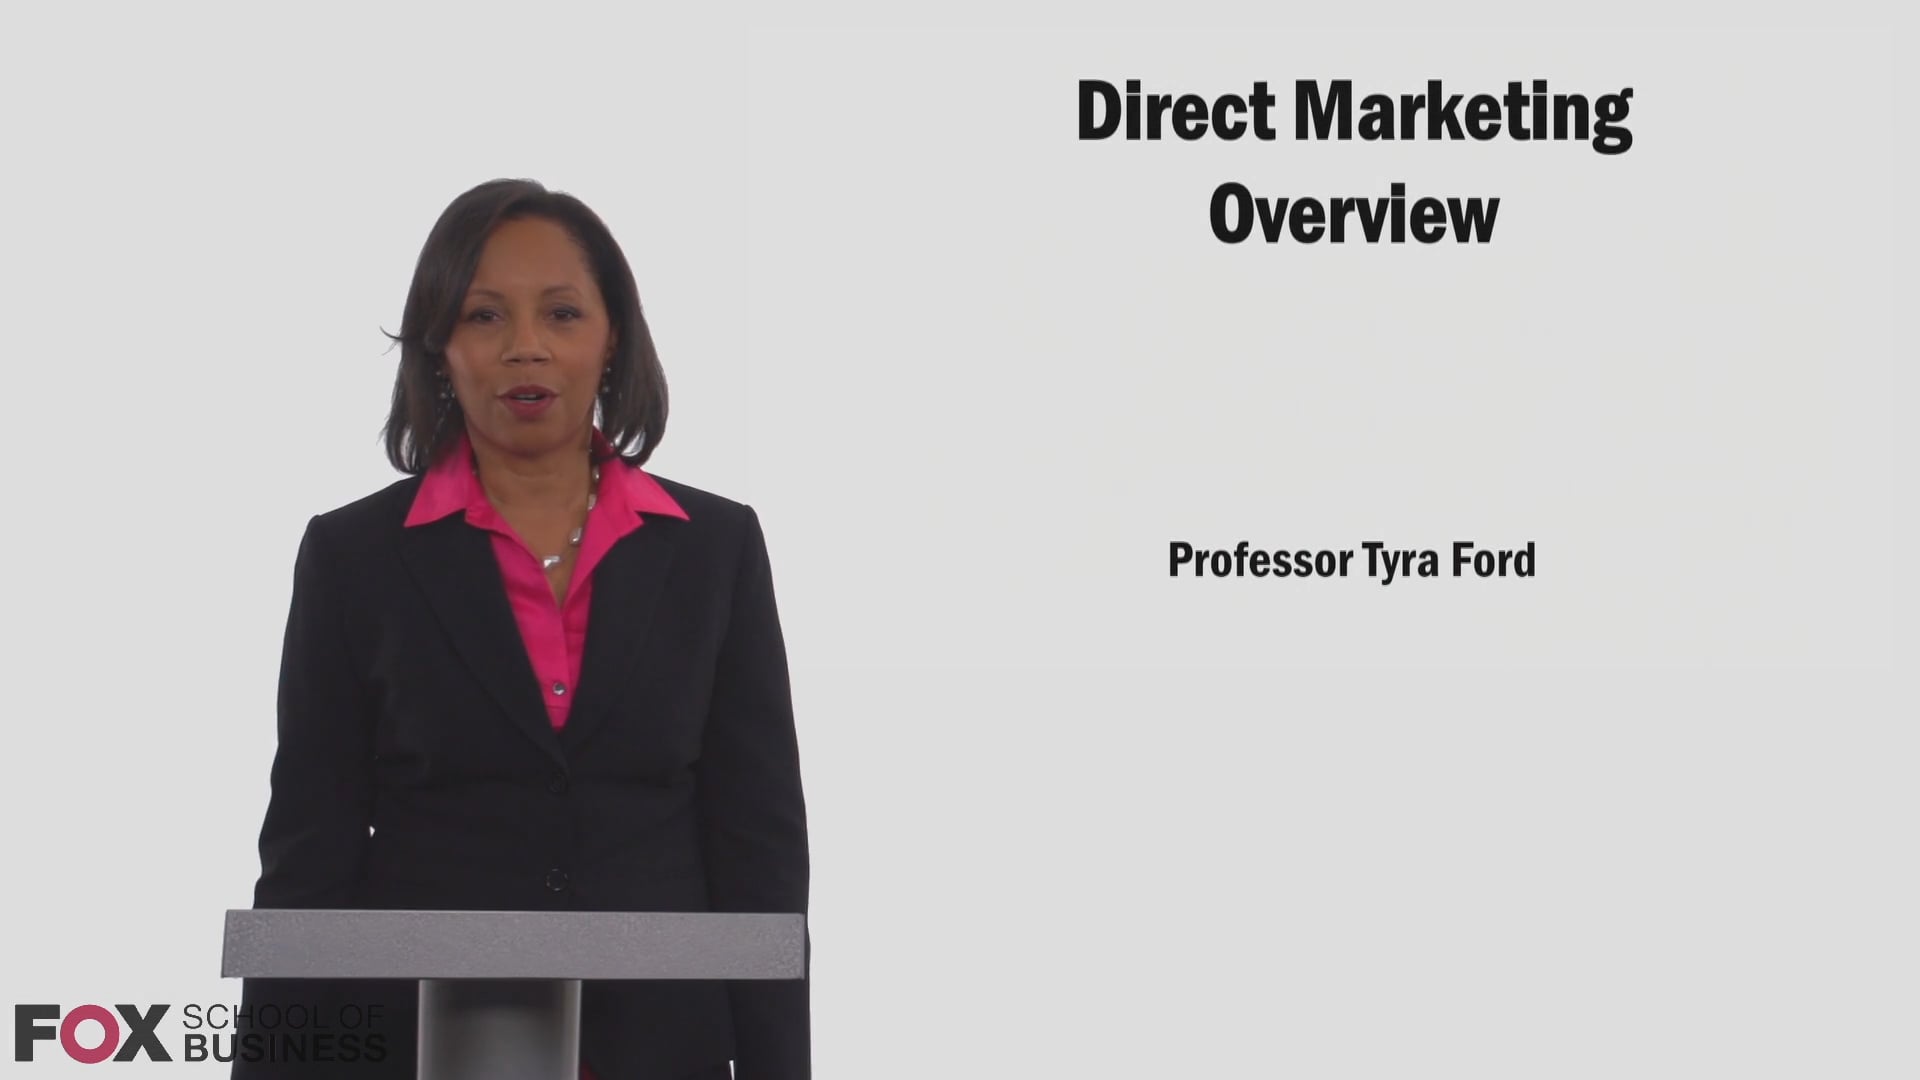 Direct Marketing Overview